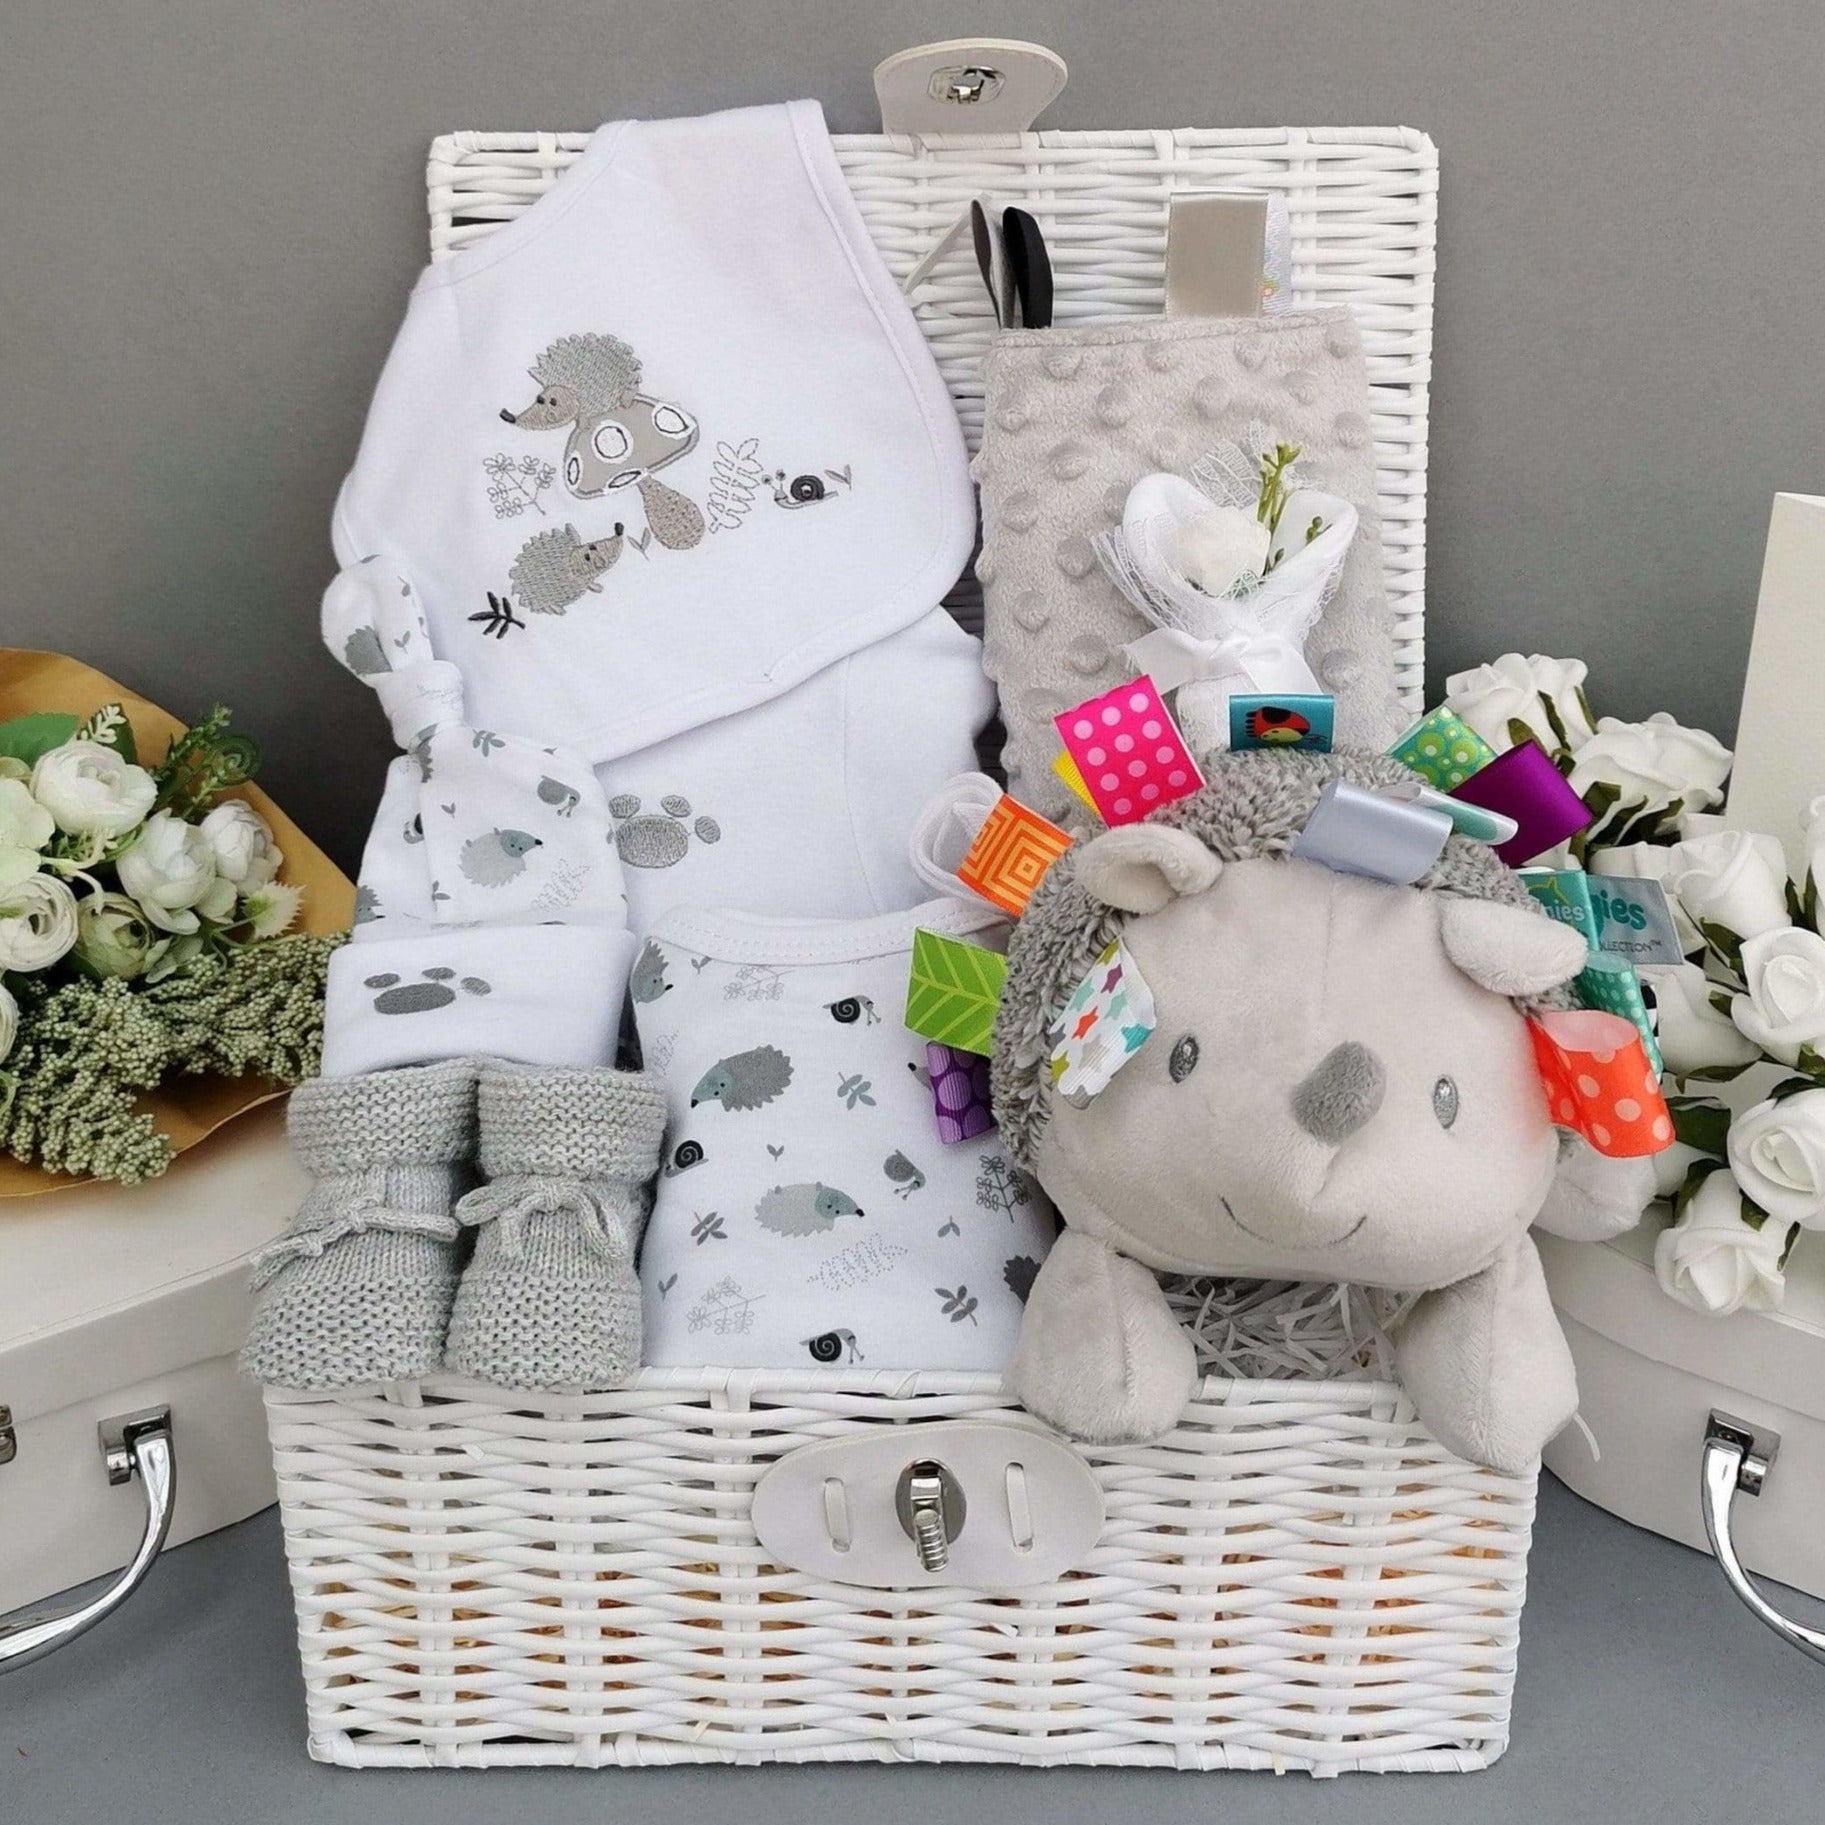 Maternity leave gifts in a basket